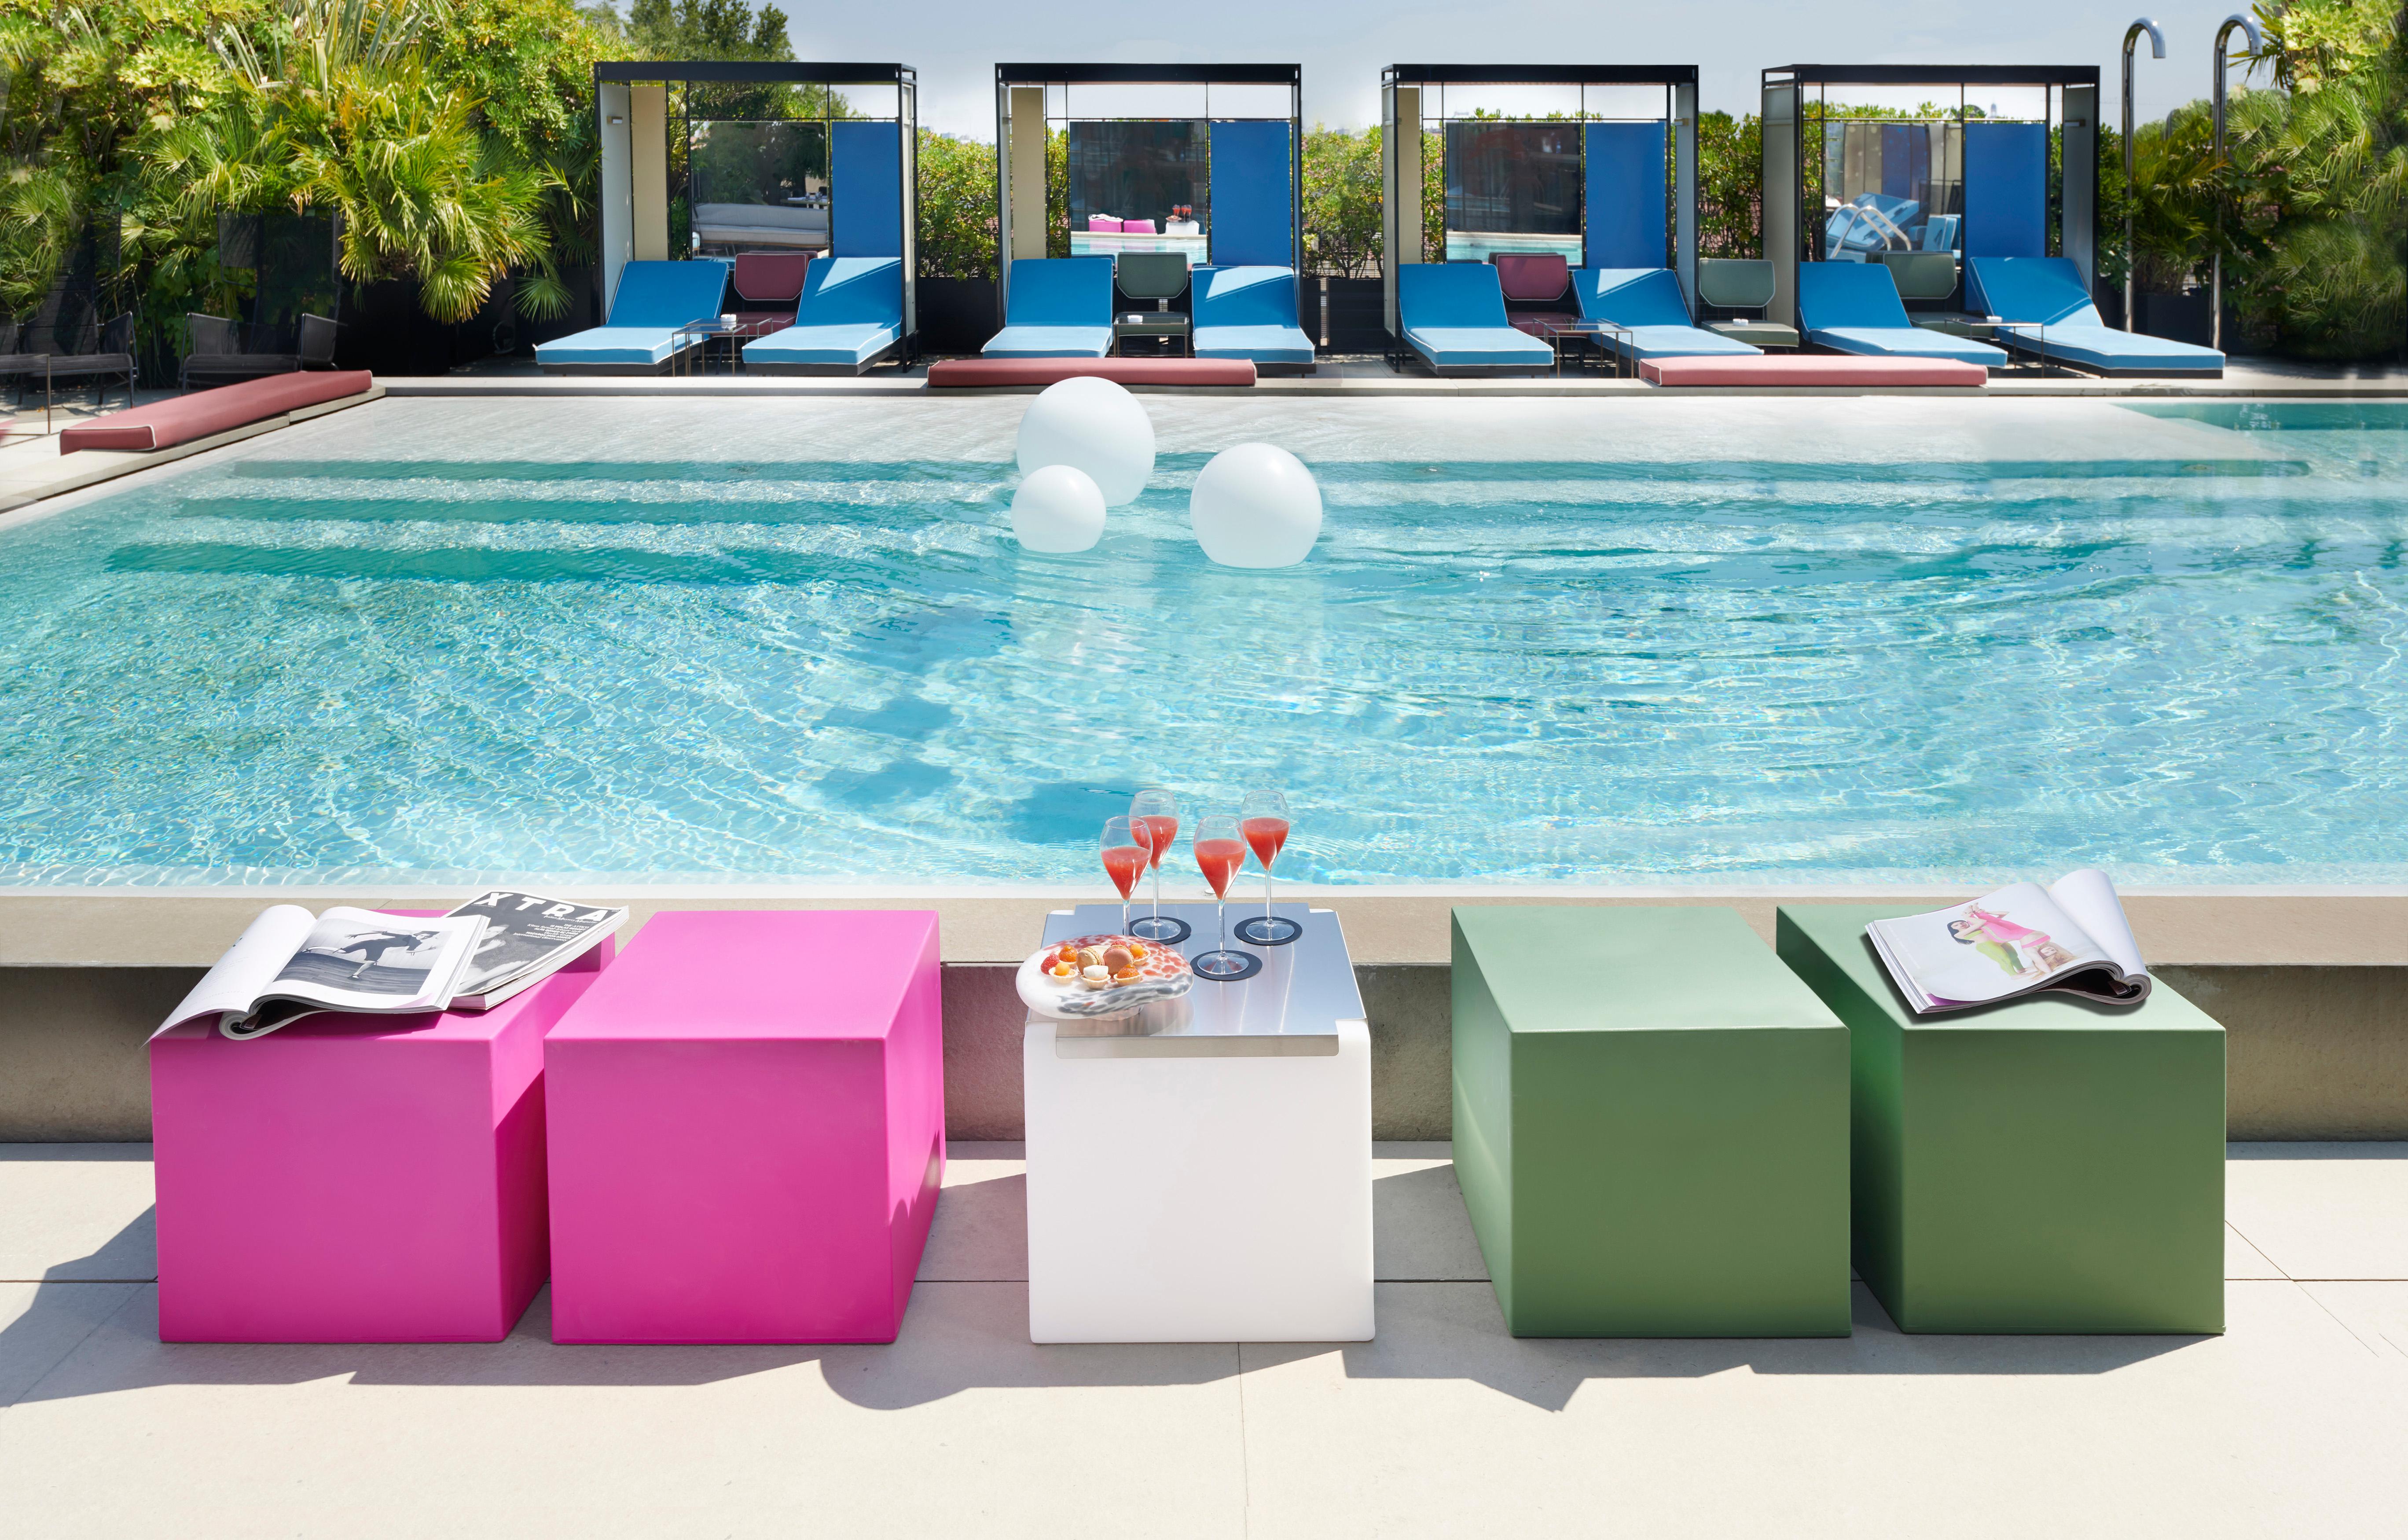 Chocolate Brown Cubo Pouf Stool by SLIDE Studio
Dimensions: D 43 x W 43 x H 43 cm. 
Materials: Polyethylene.
Weight: 4 kg.

Available in different color options. This product is suitable for indoor and outdoor use. Available in different versions: